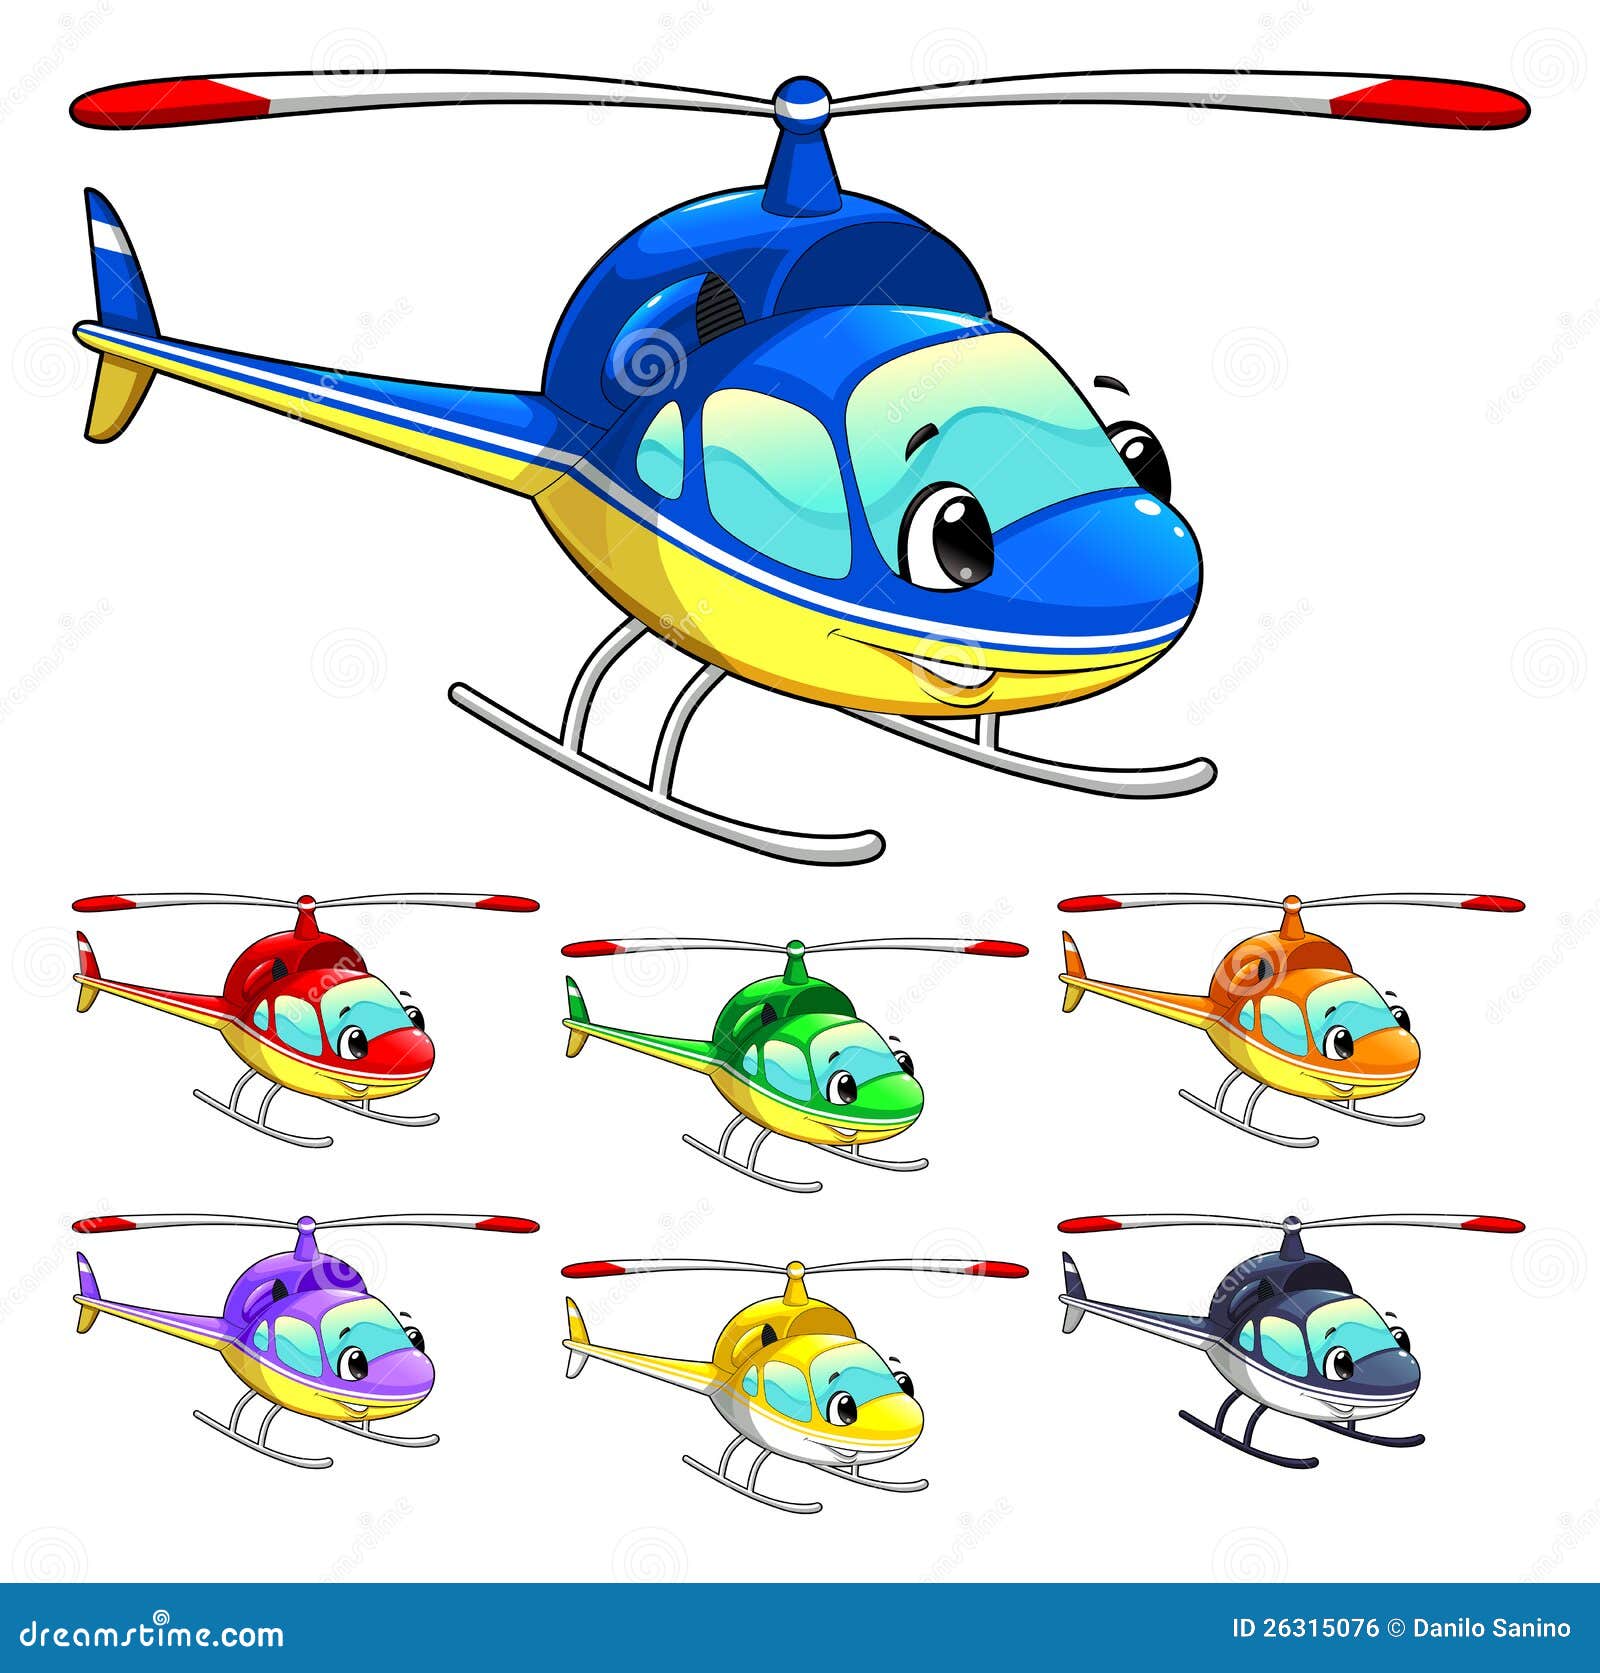 helicopter cartoon